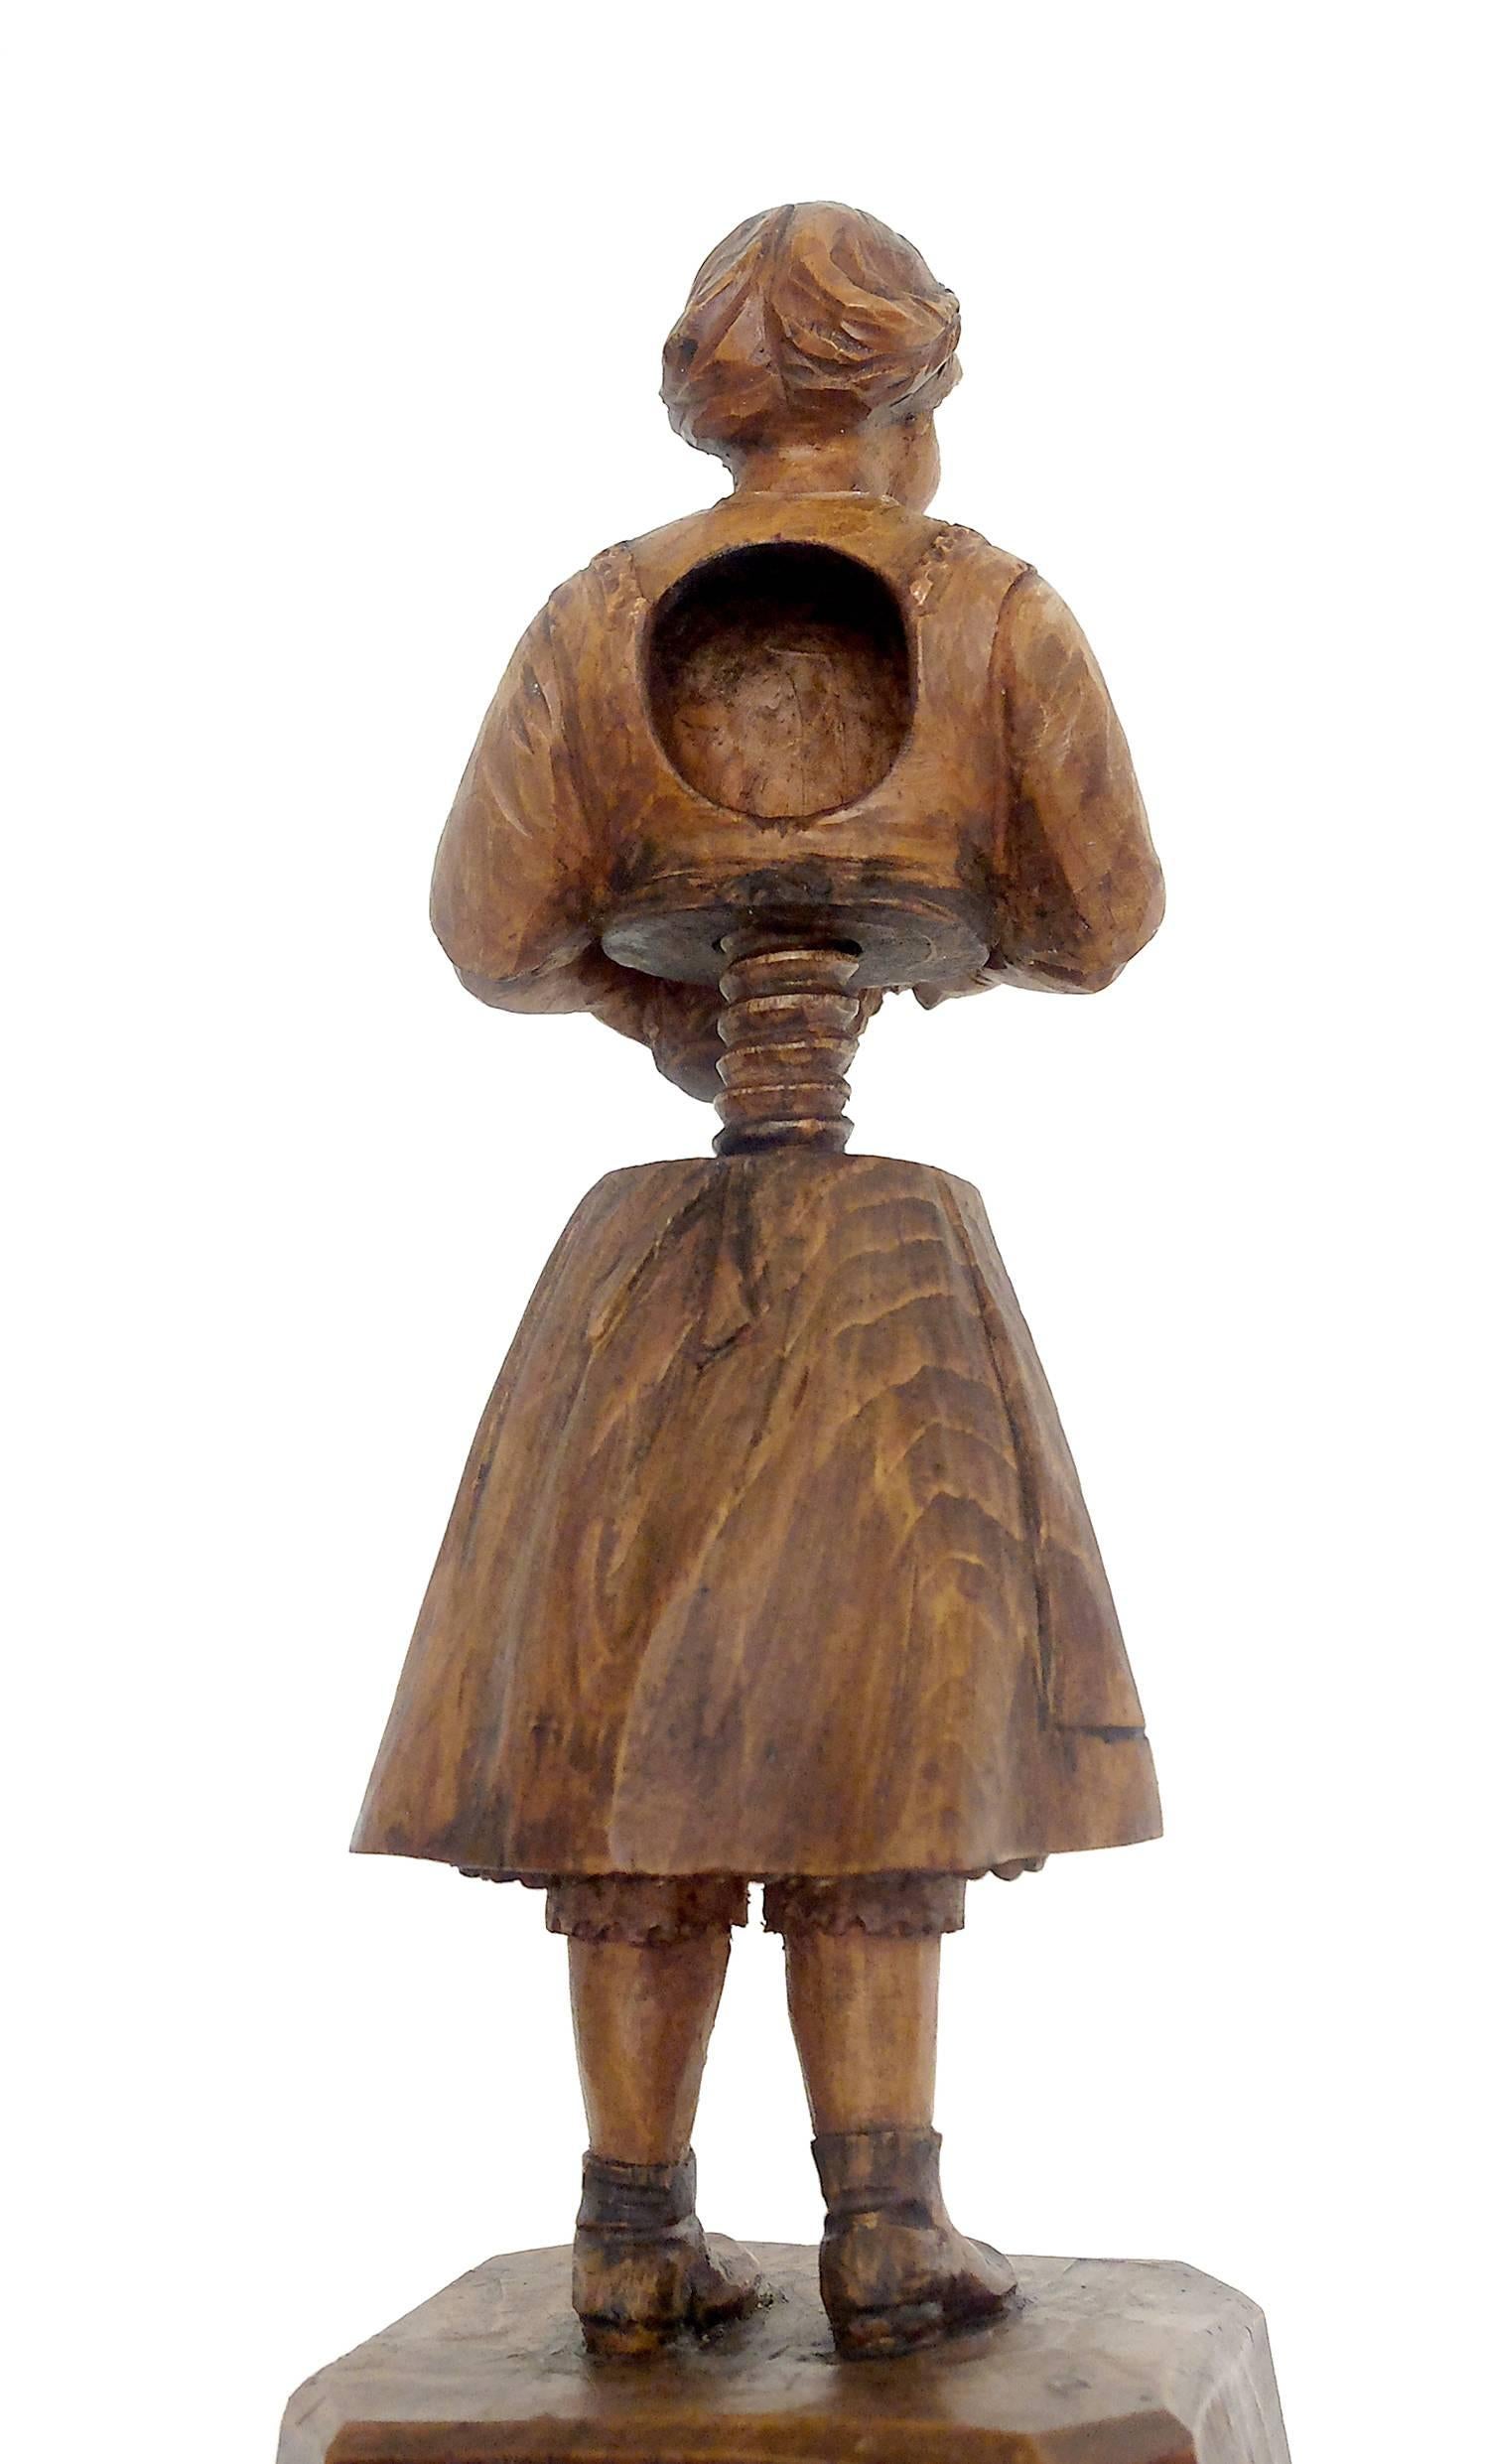 The nutcracker is sculpted and carved out of fruitwood and depicts a charming, smiling young girl holding a floral basket, Tyrol, circa 1880.

 